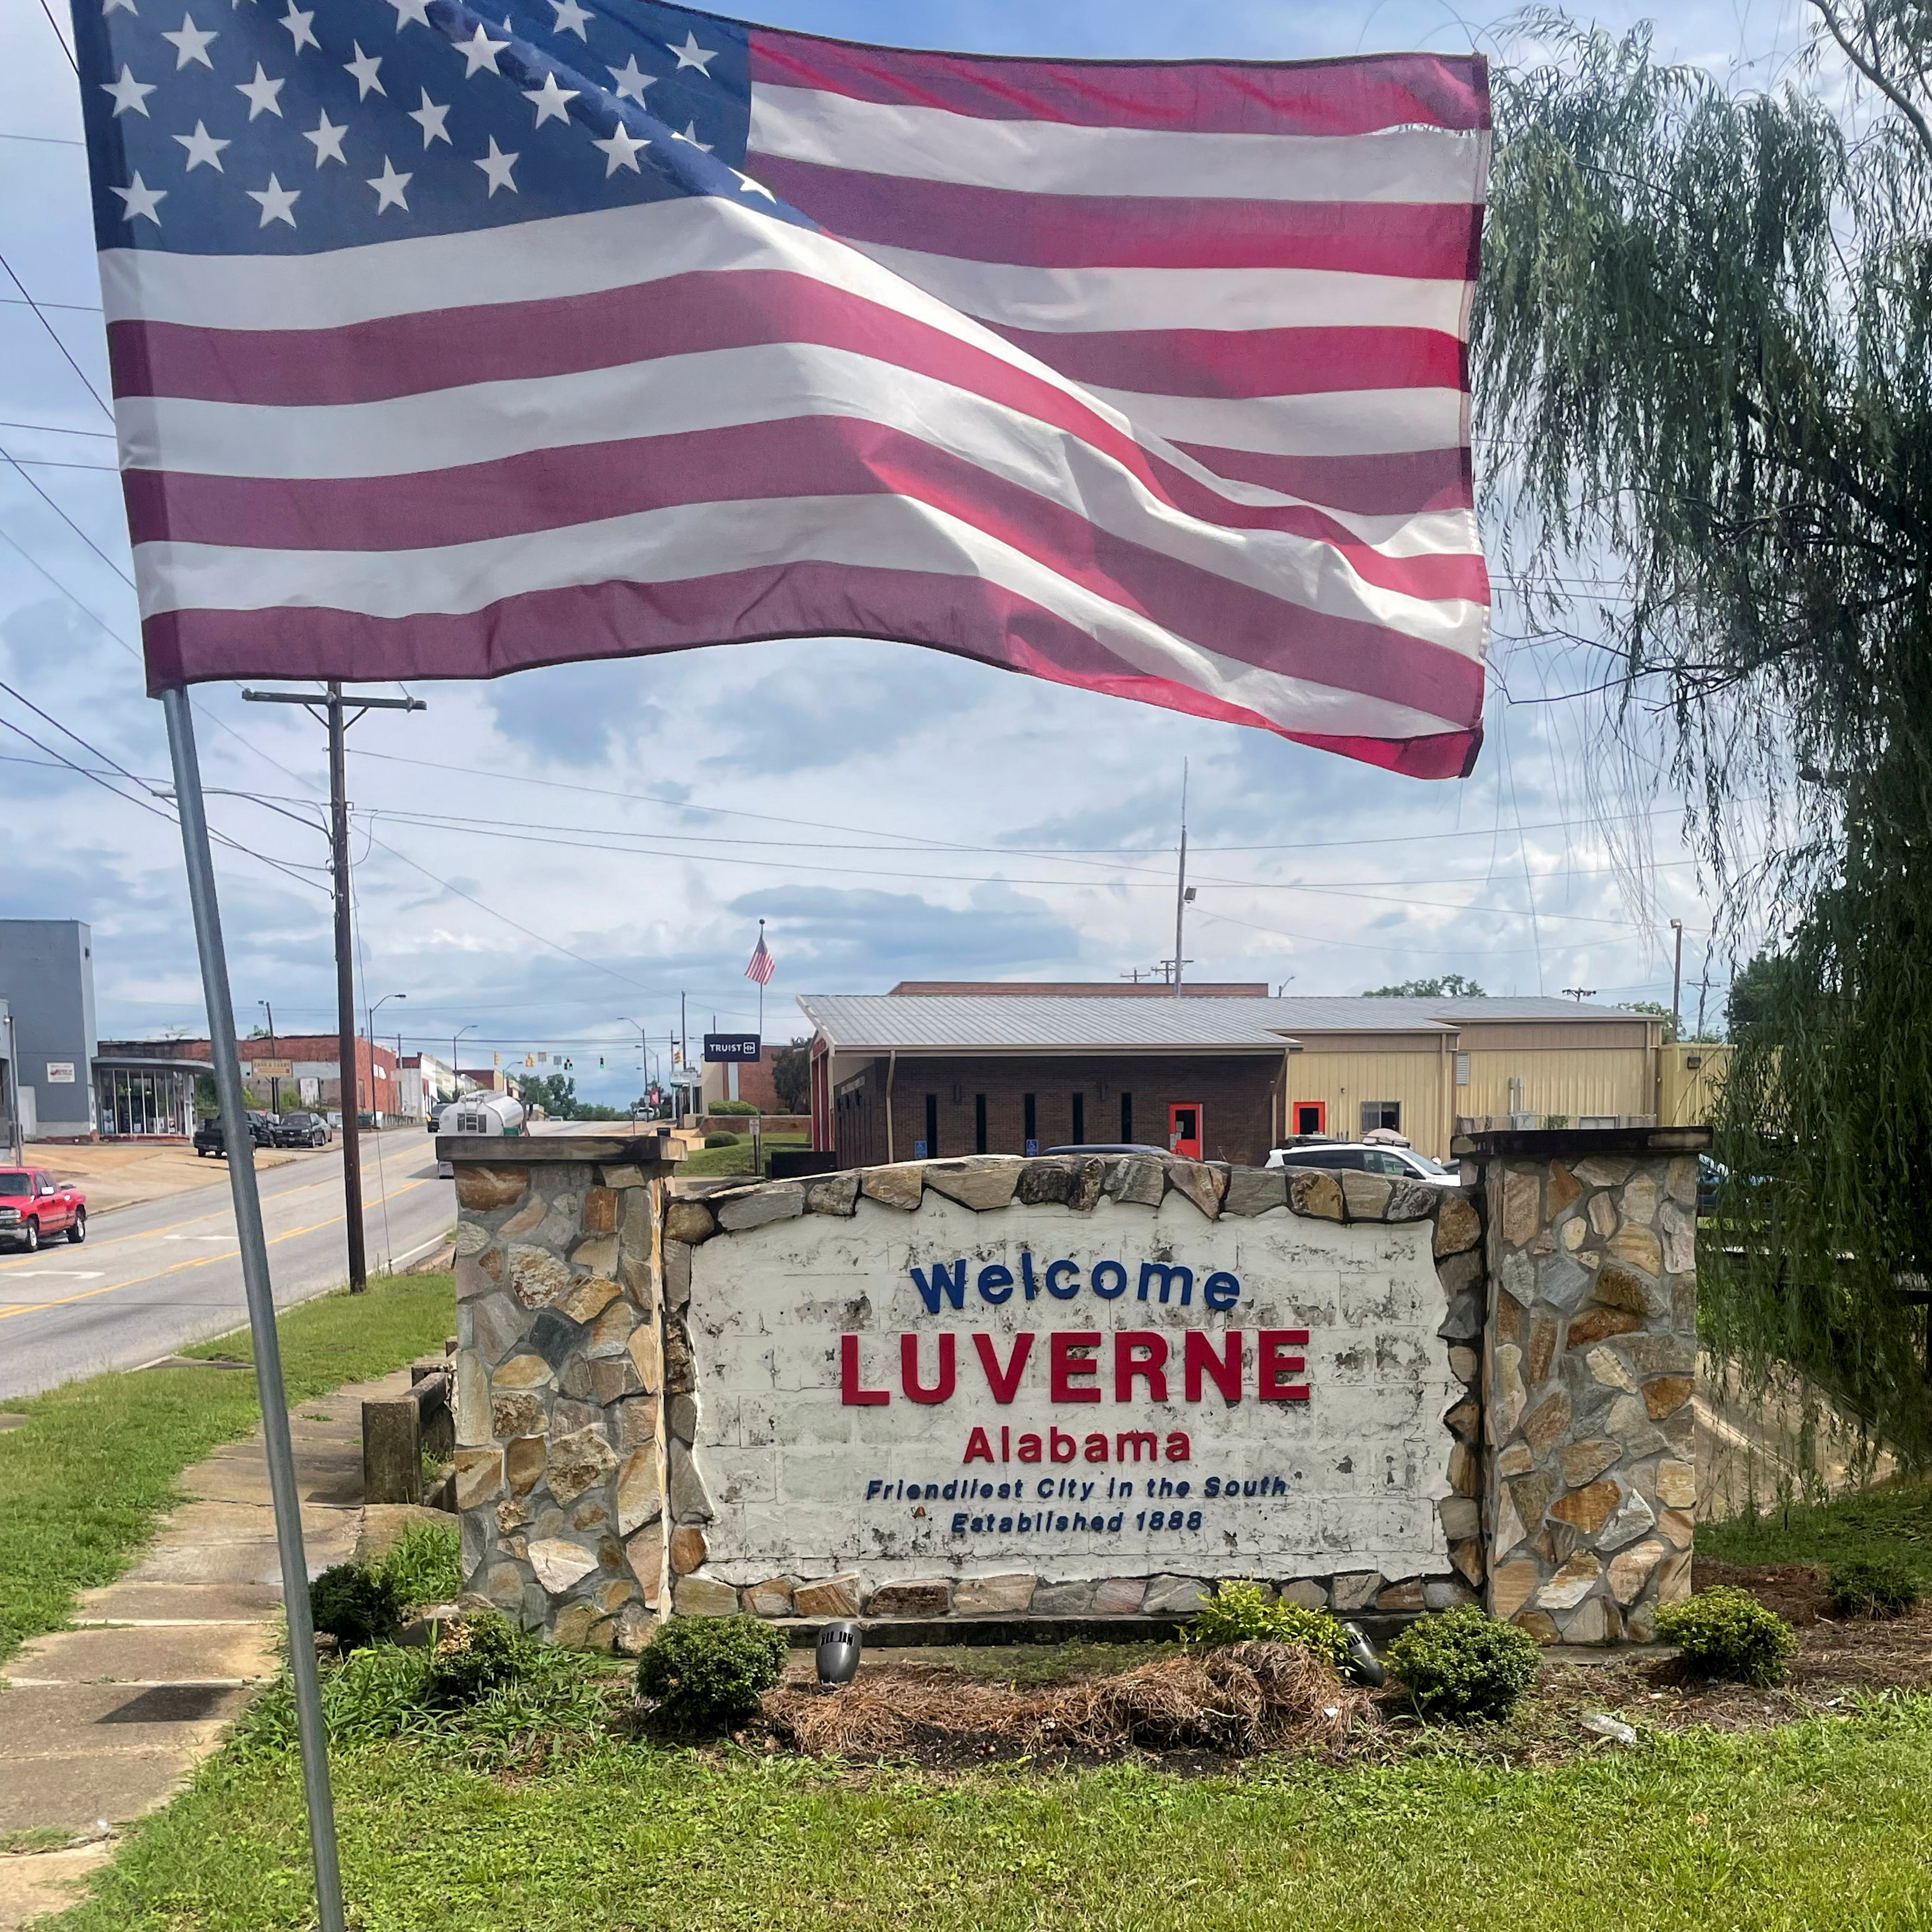 U.S. flag flies above a welcome sign in Luverne